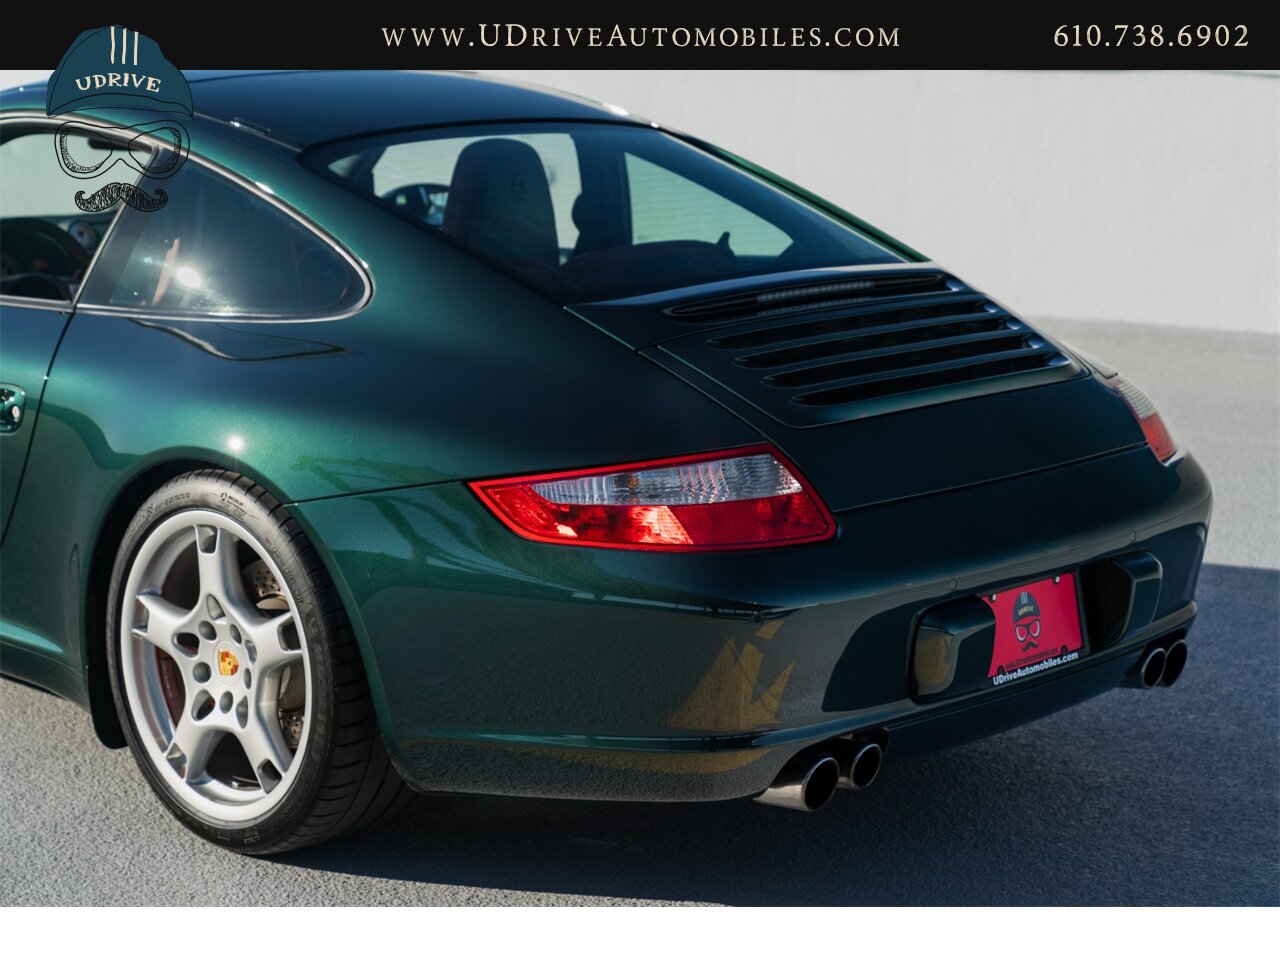 2007 Porsche 911 Carrera S 6Spd 997S RARE X51 Power Kit 381hp  1 of a Kind Forest Green over Blk/Terracotta Chrono Adap Sport Sts $113k MSRP - Photo 23 - West Chester, PA 19382